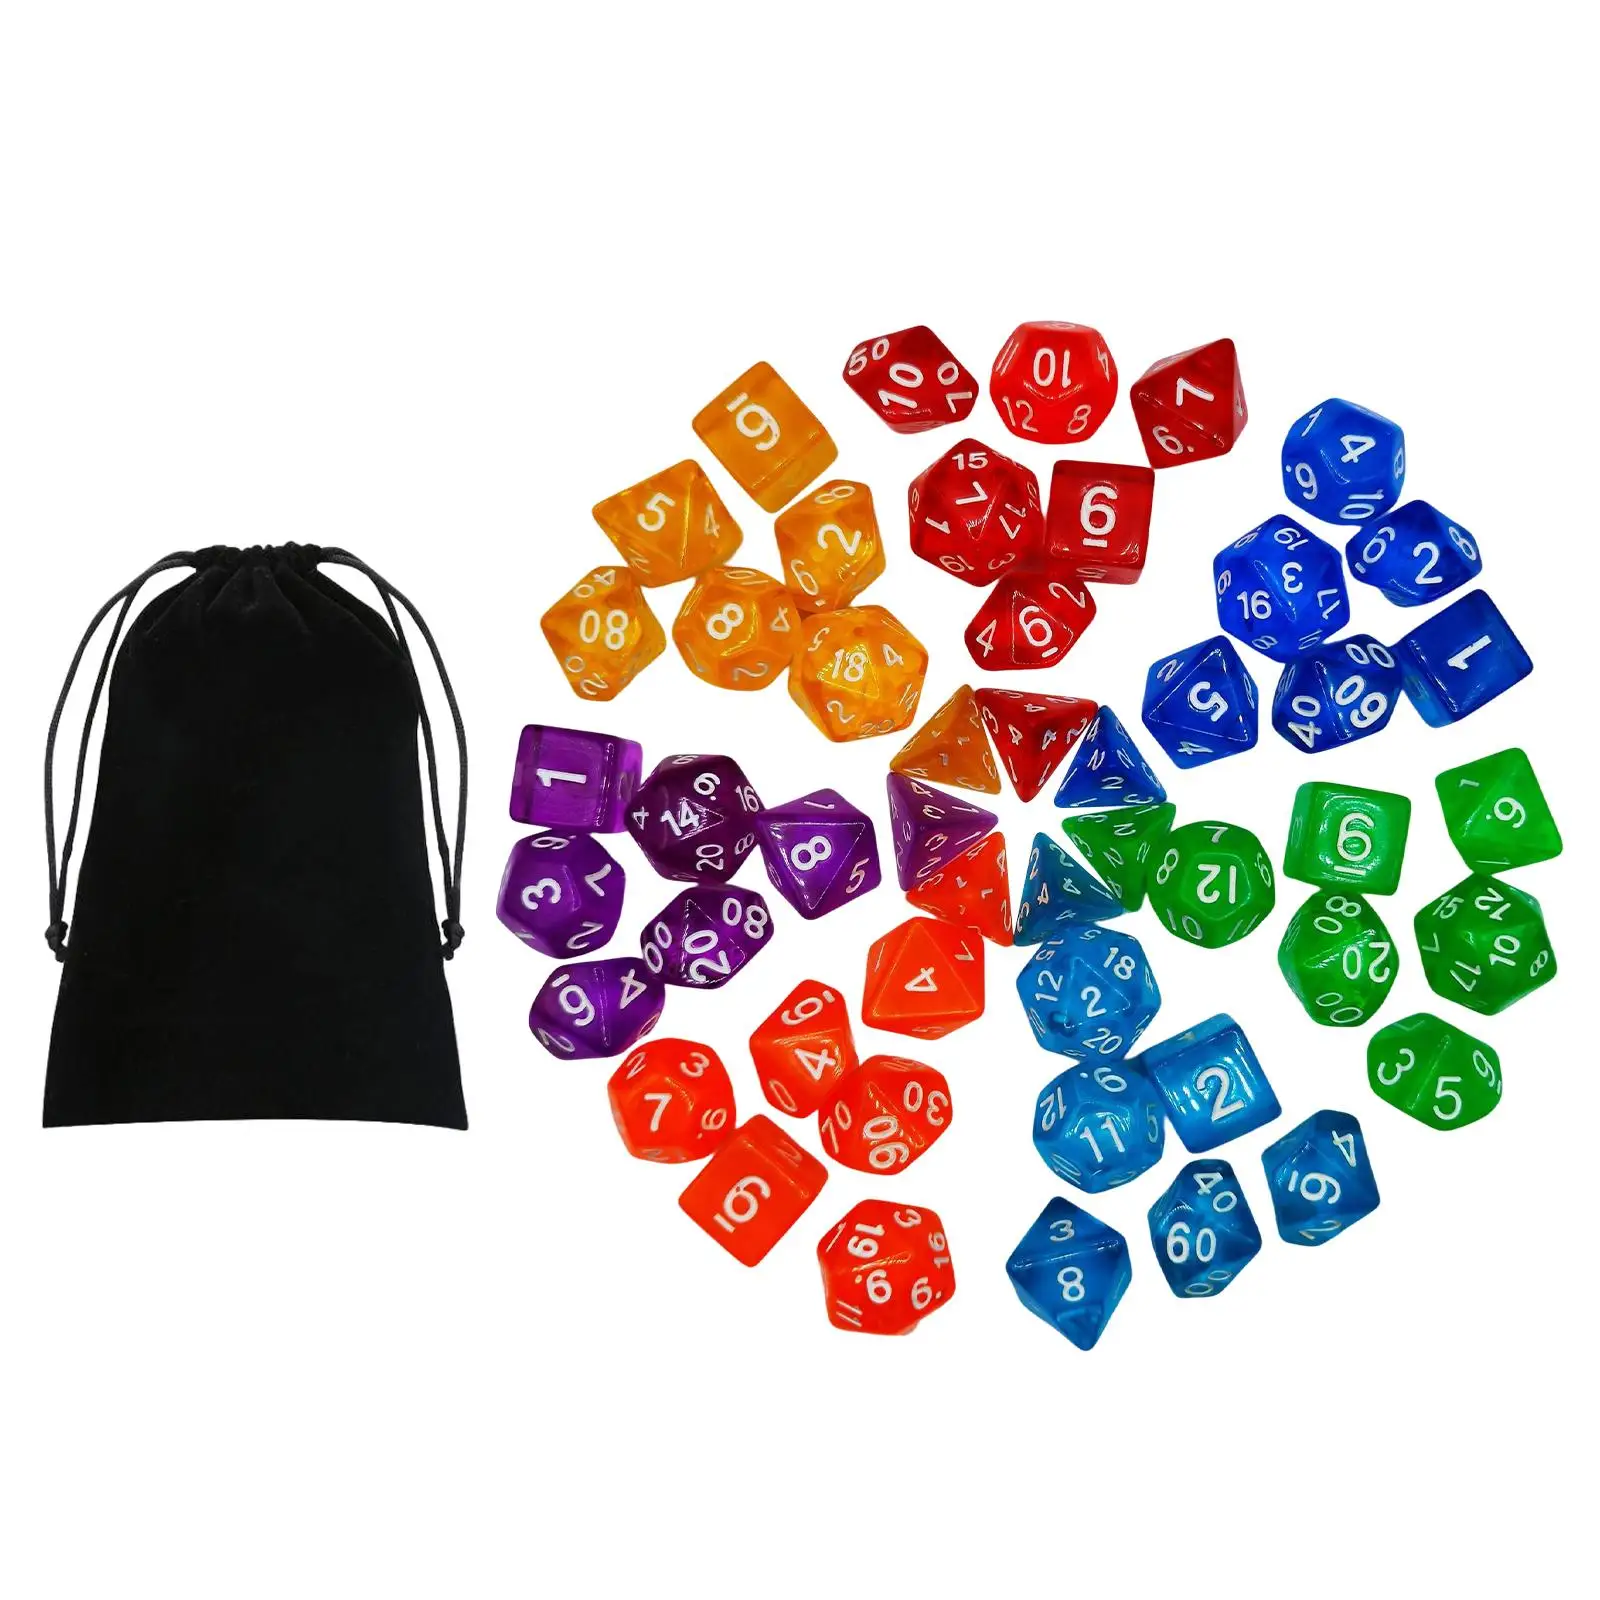 49x Polyhedral Dices Toys D8 D10 D12 D20 Math Teaching Colored Rolling Dices